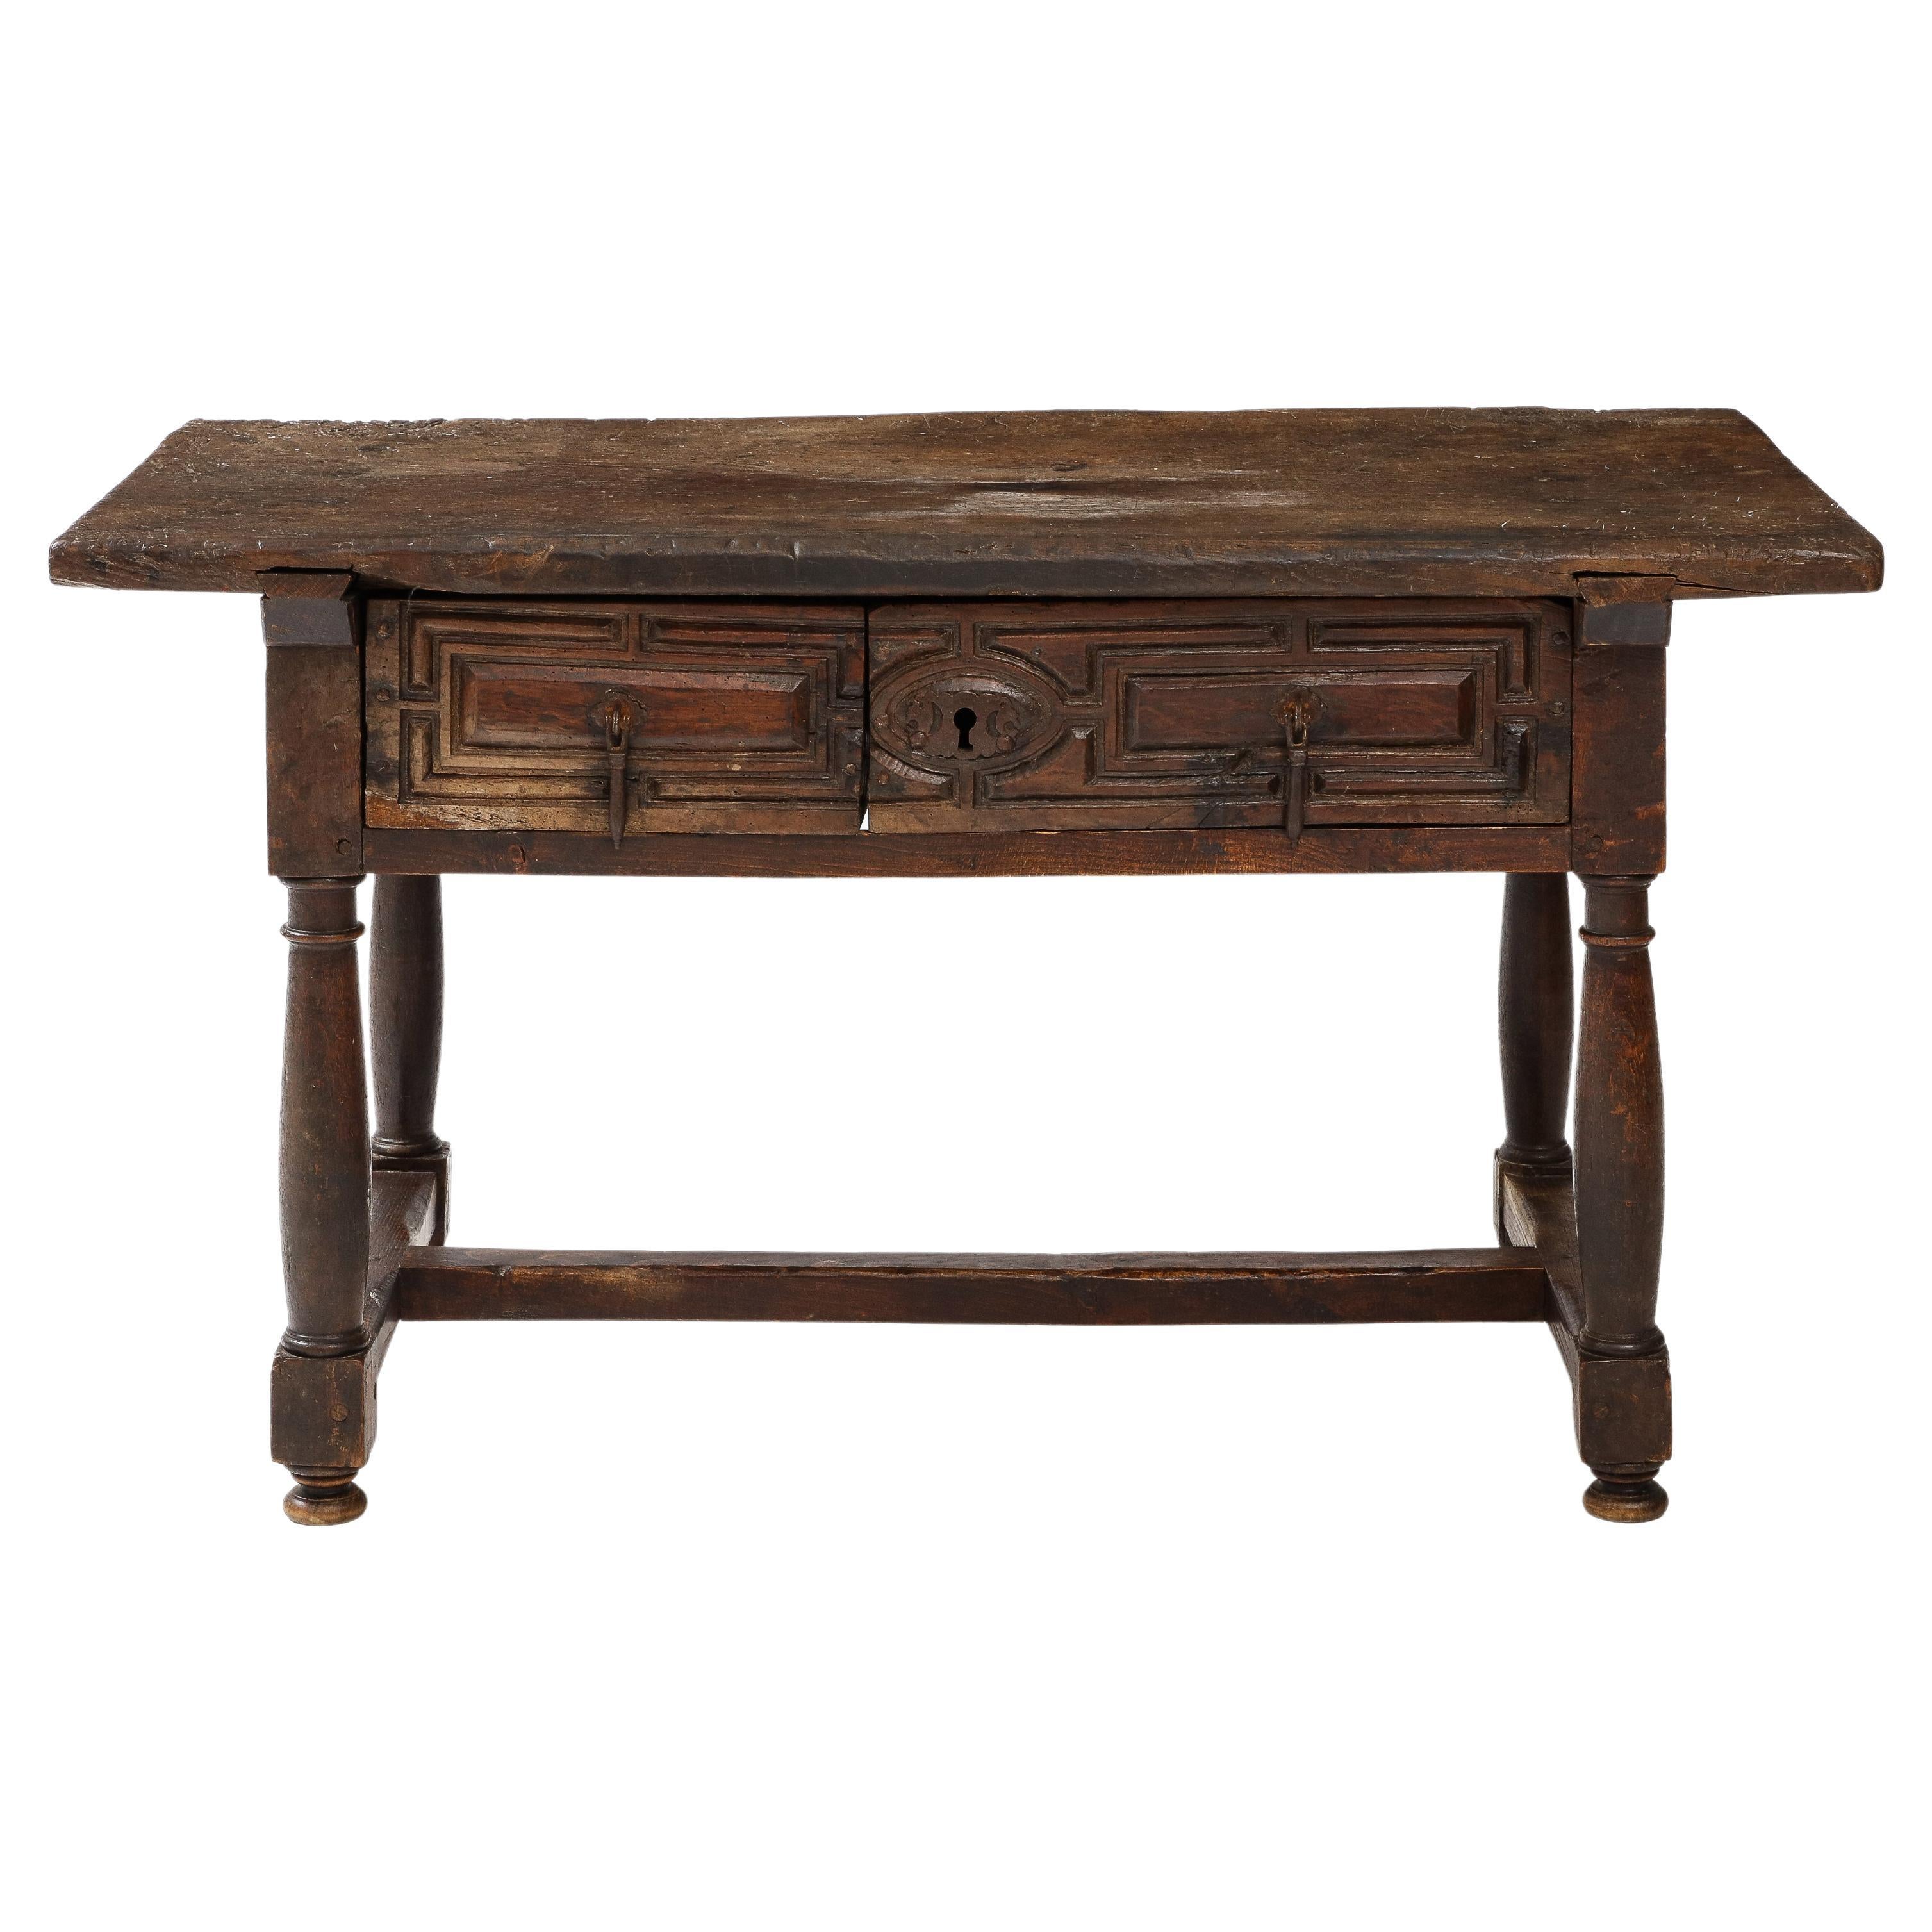 Late 16th C. Spanish Walnut Table with Iron Pulls & Drawers For Sale